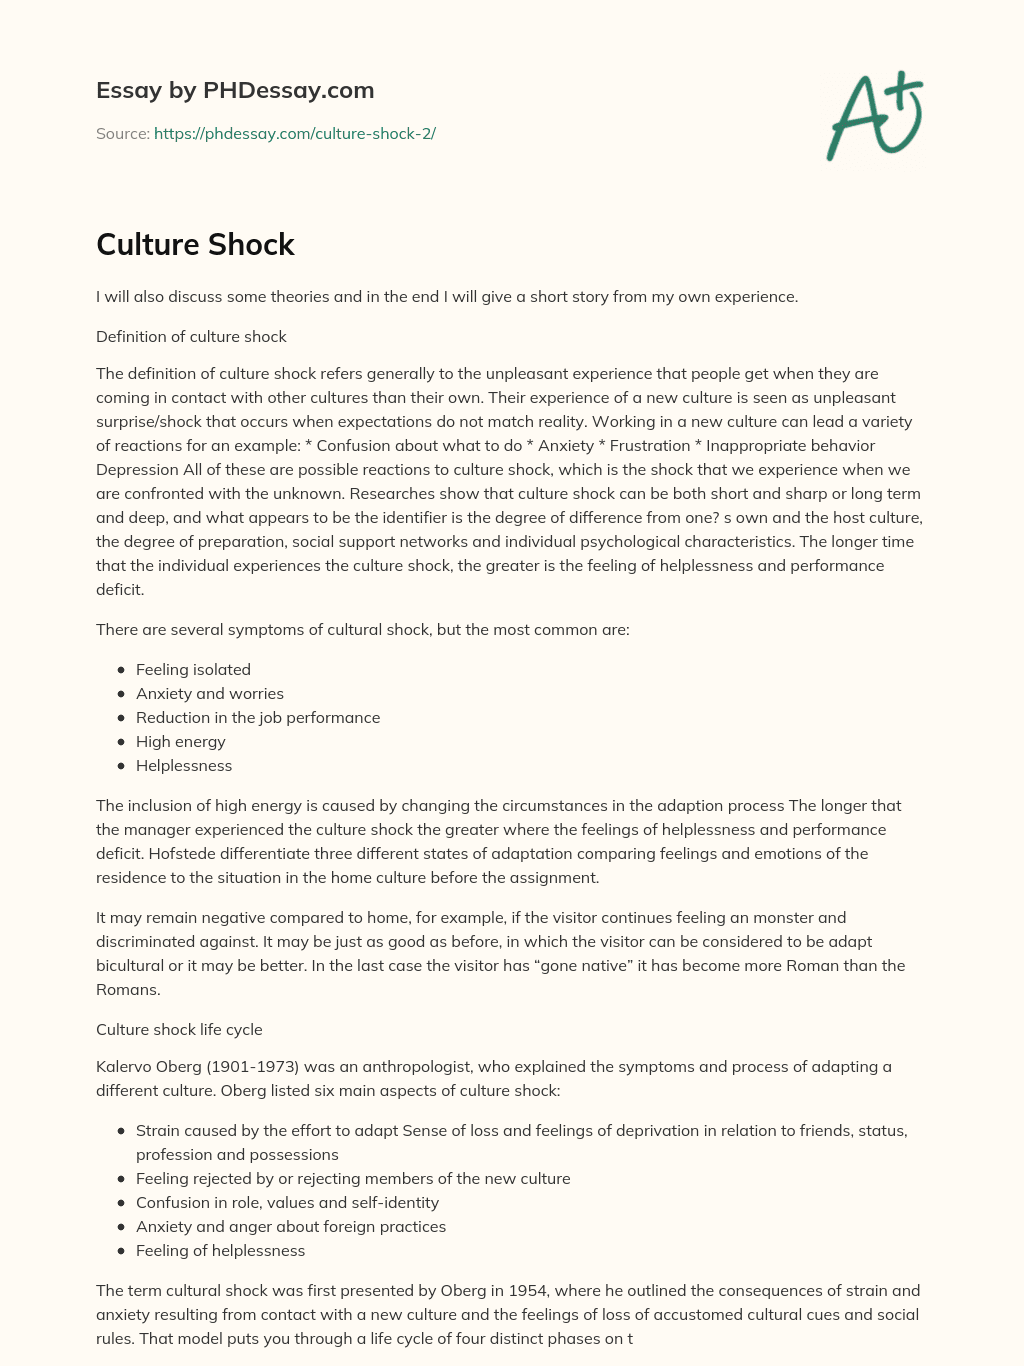 example of culture shock essay